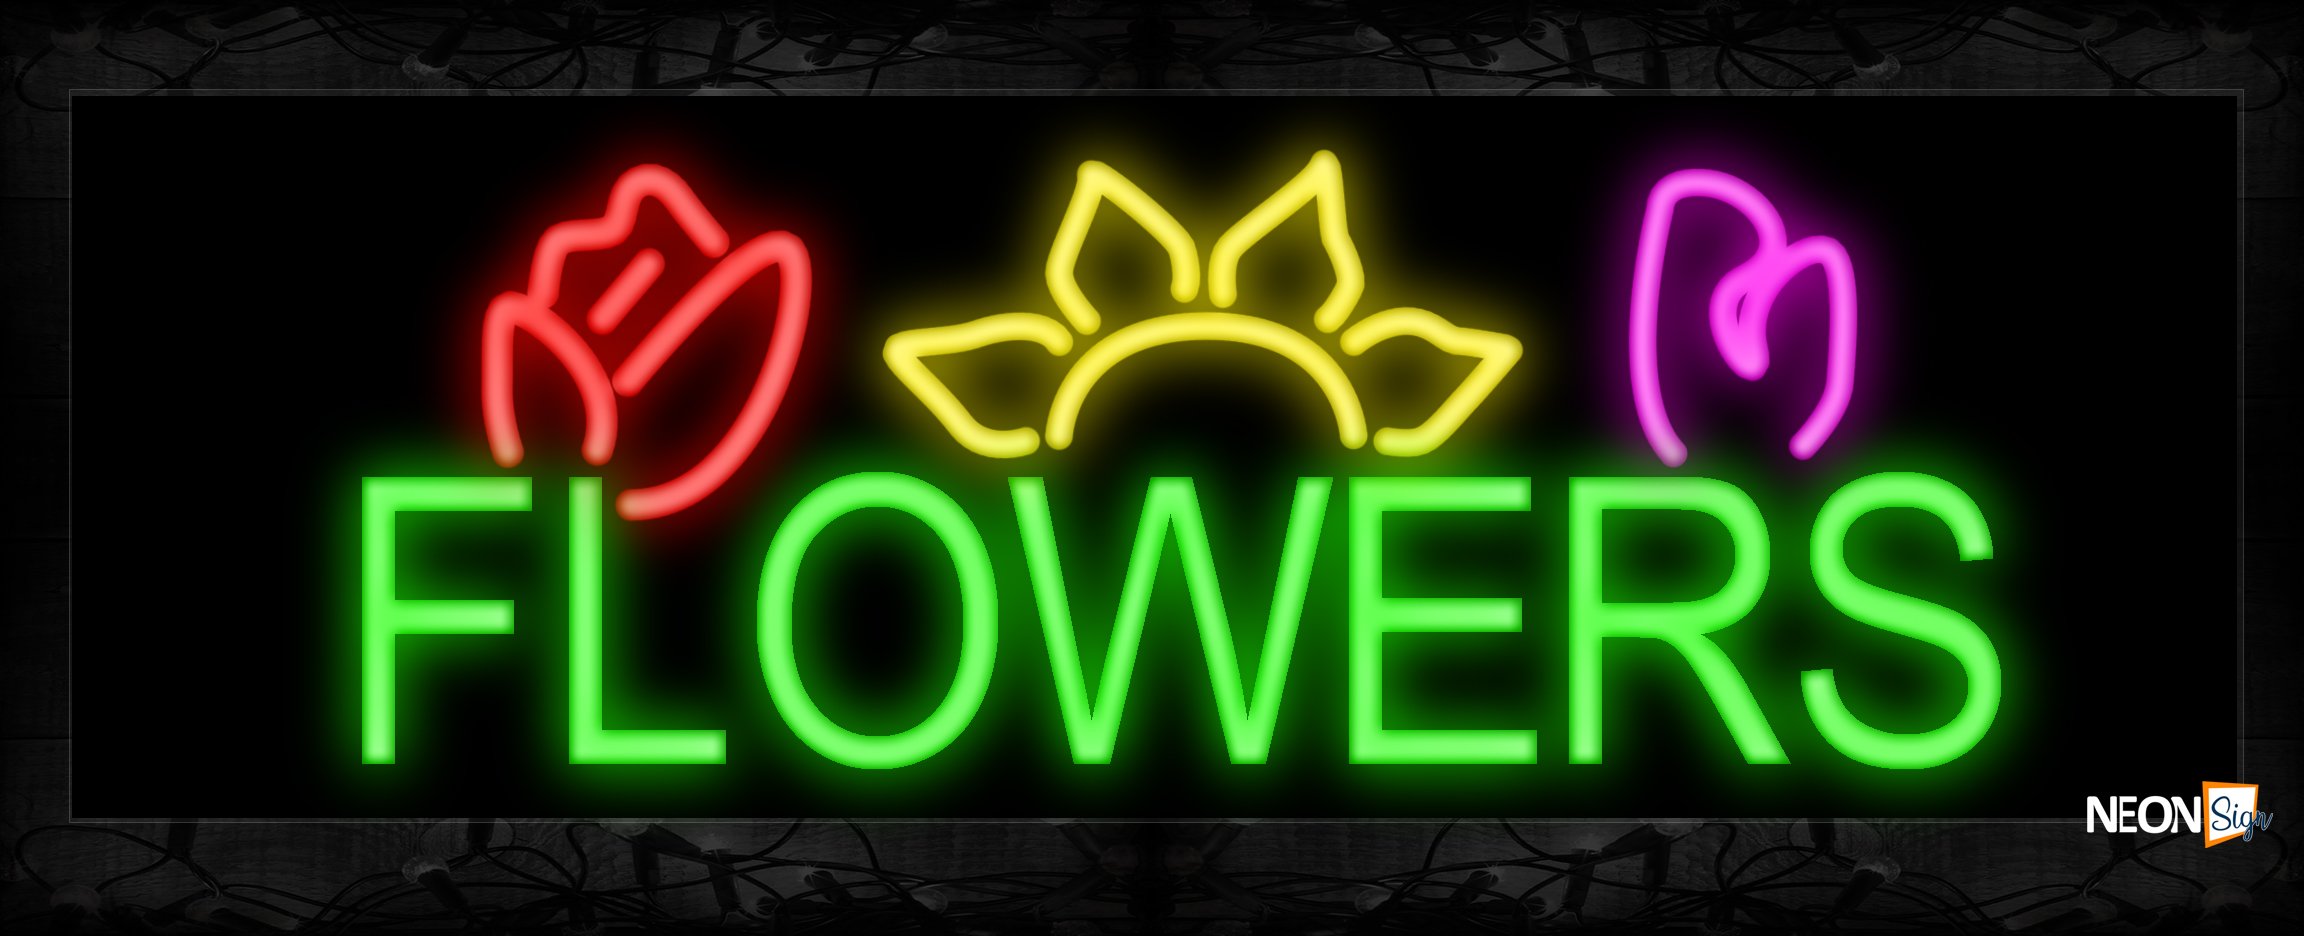 Image of 10059 Flower in green with flowers logo Neon Sign 13x32 Black Backing